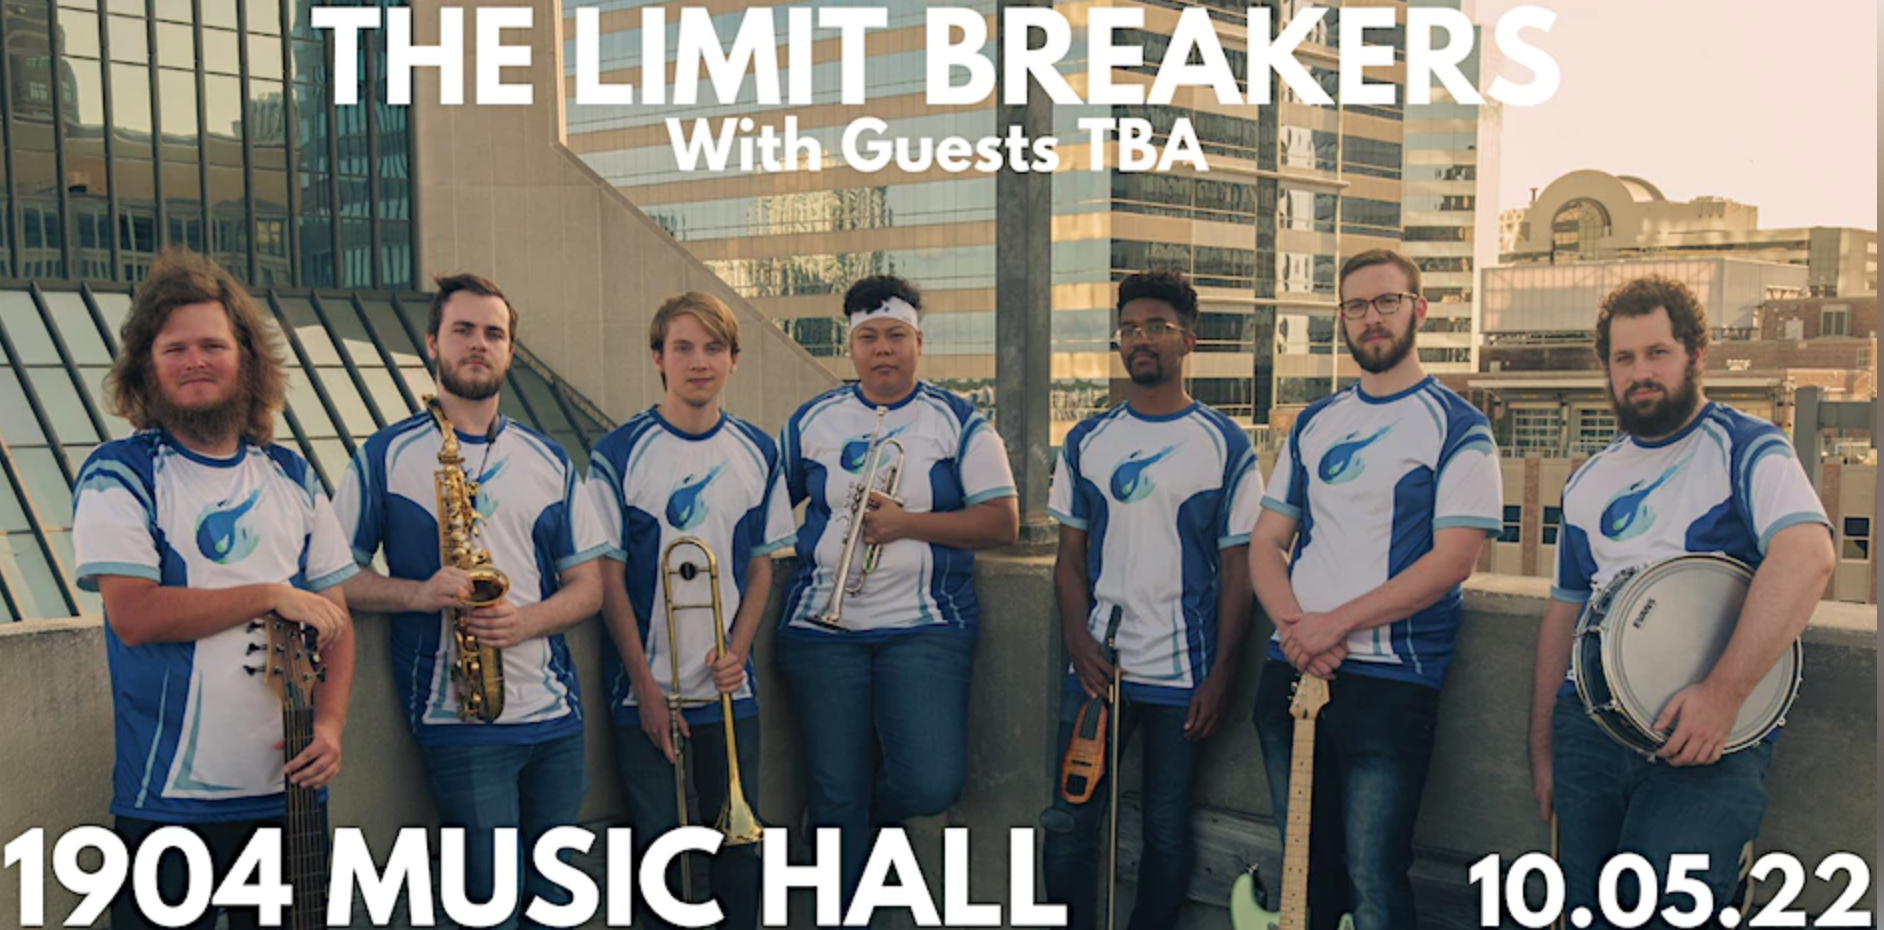 The Limit Breakers